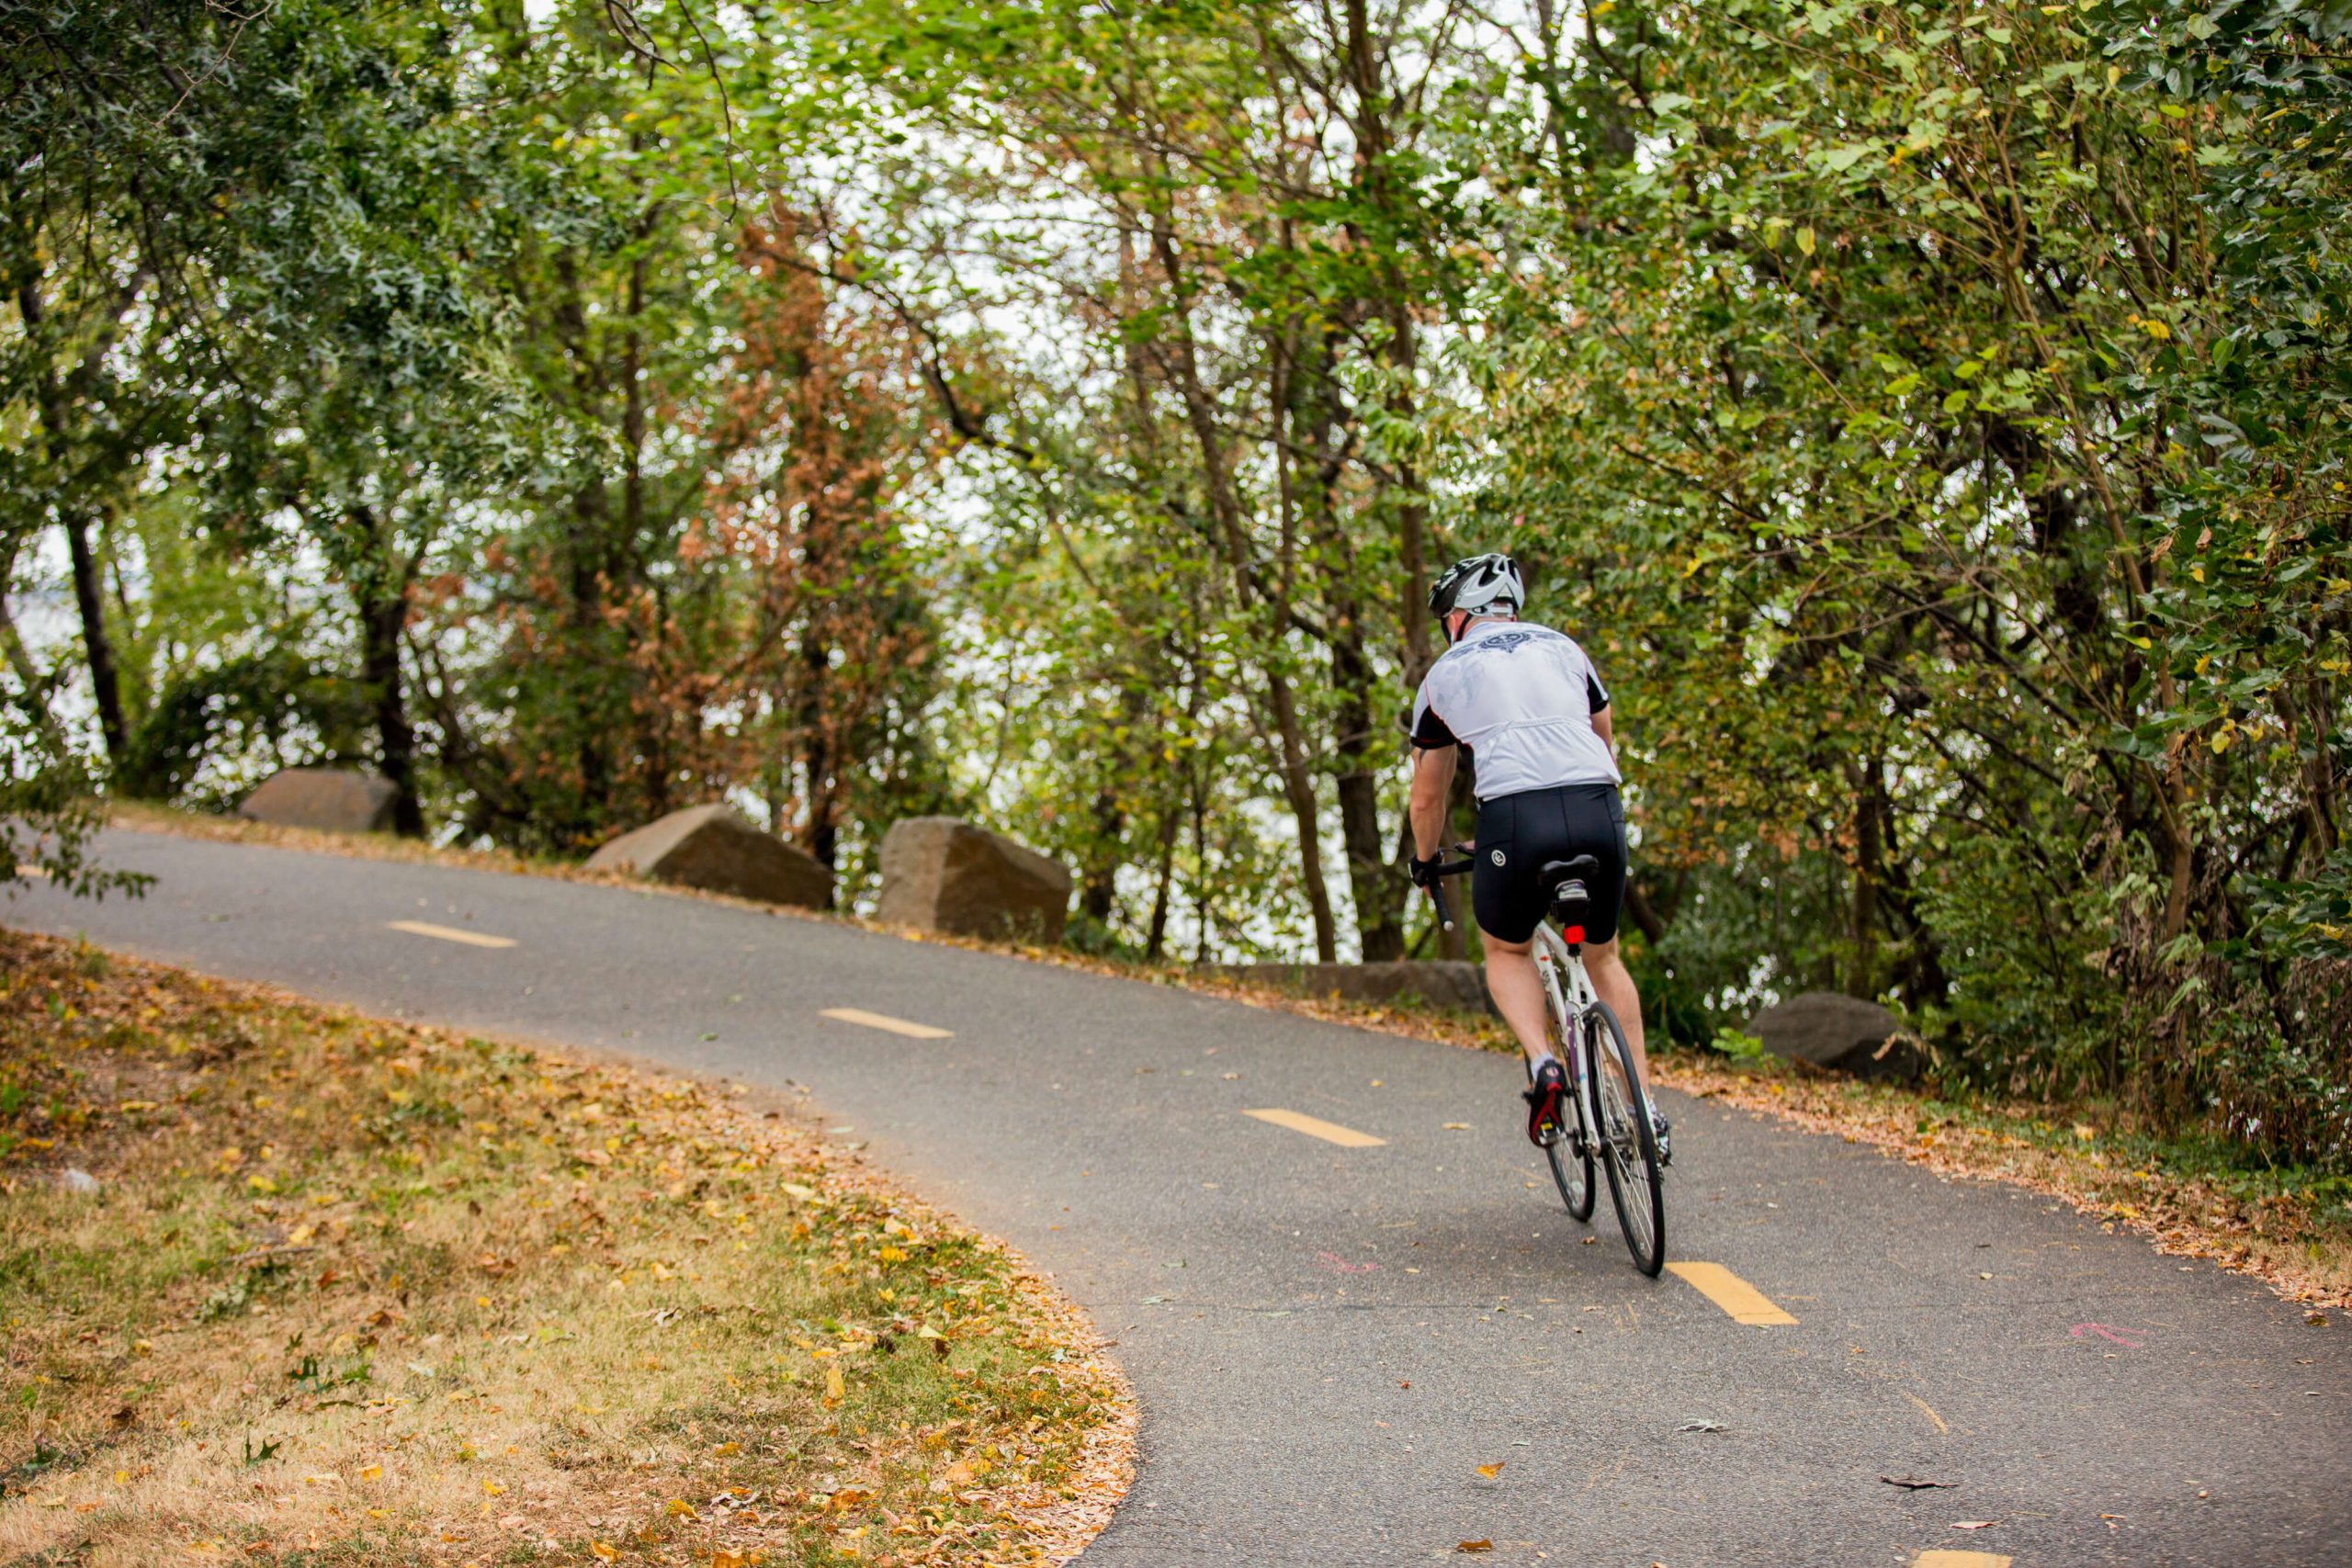 Embark on a ride through one of four local neighborhood trails.